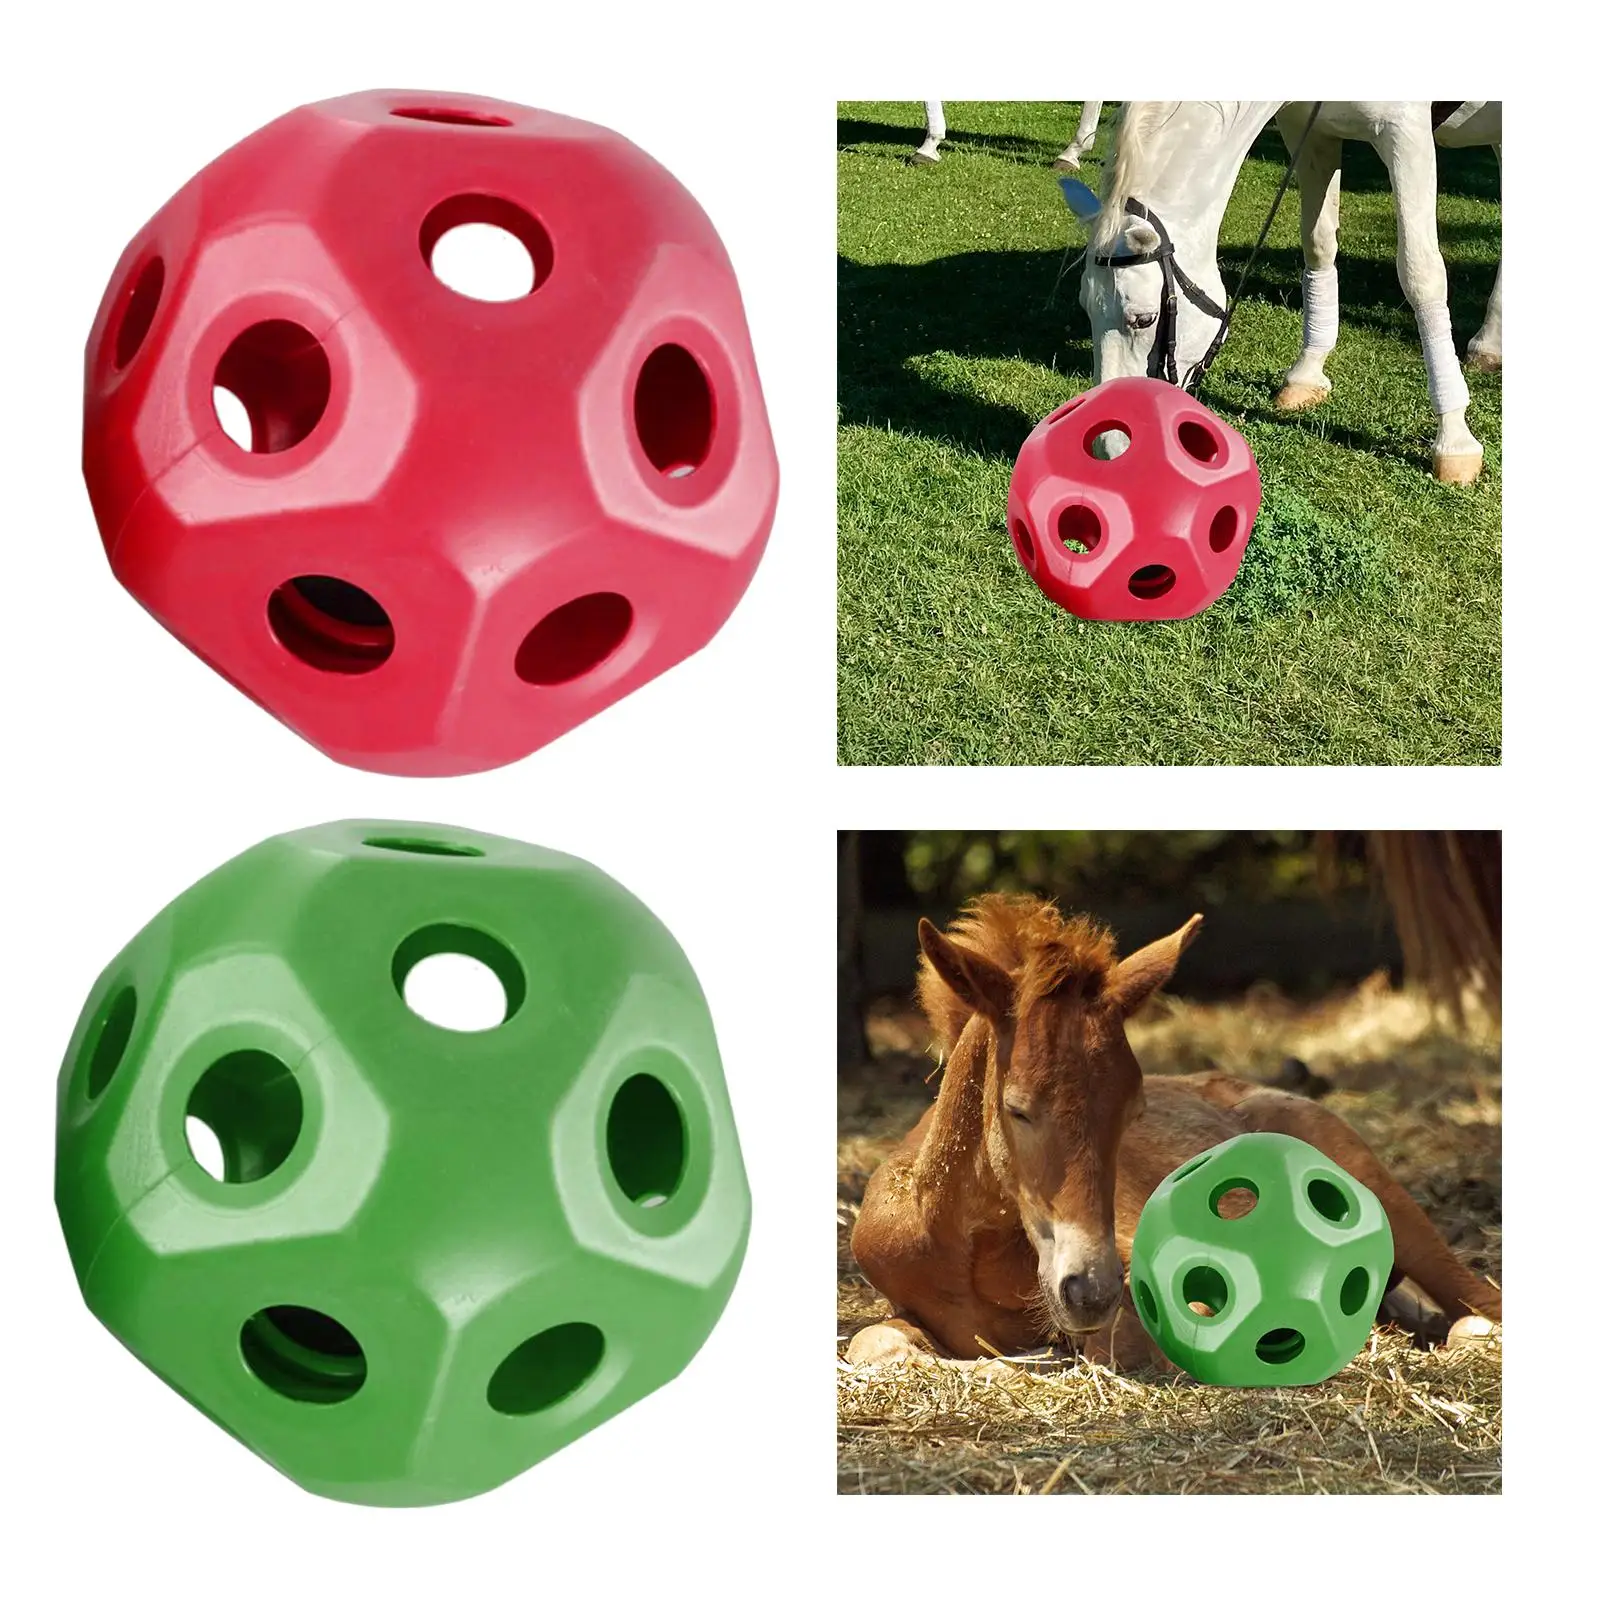 Horse Treat Ball Snack Ball Hollow Out Hay Feeding Toy Carrot Feeder Toy Multipurpose Horse Hay Ball for Horse Stable Stall